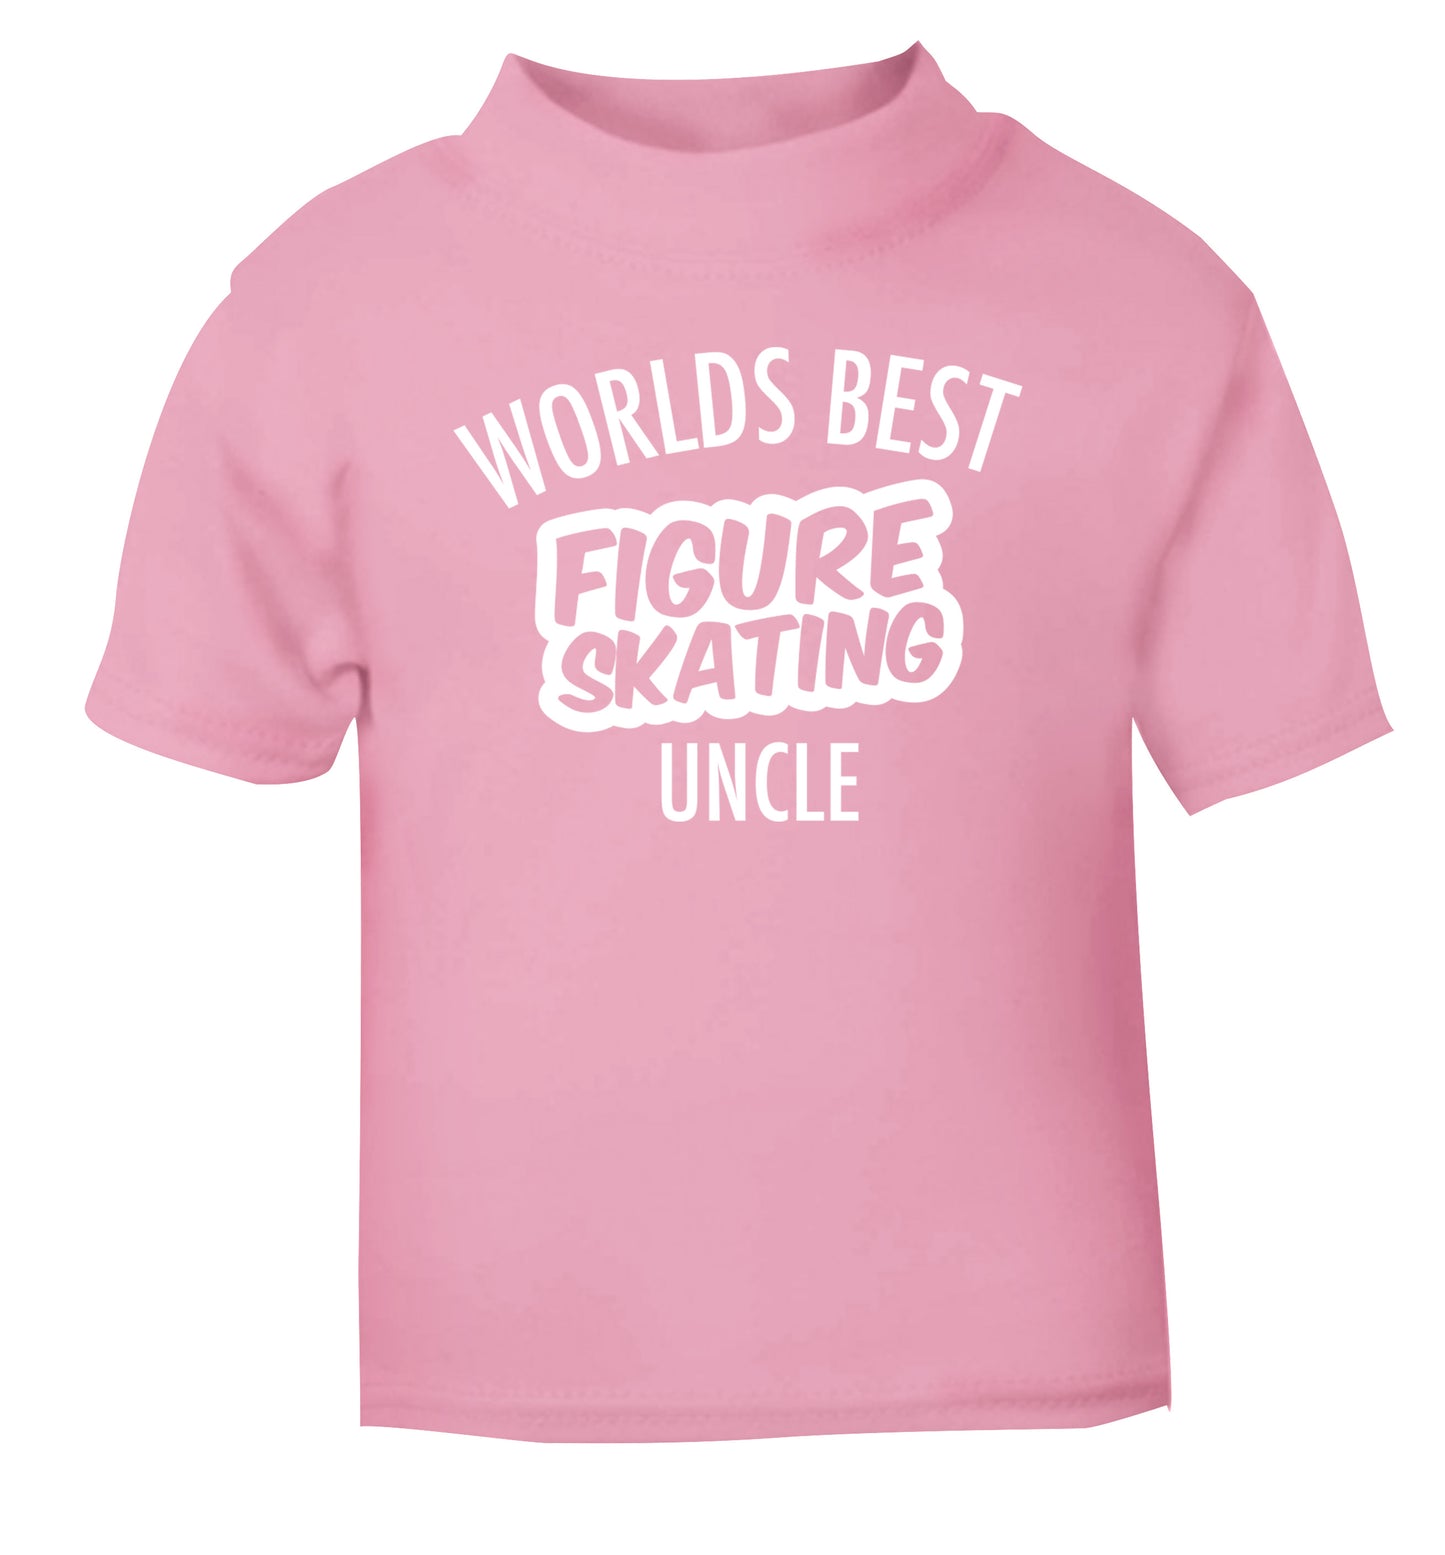 Worlds best figure skating uncle light pink Baby Toddler Tshirt 2 Years